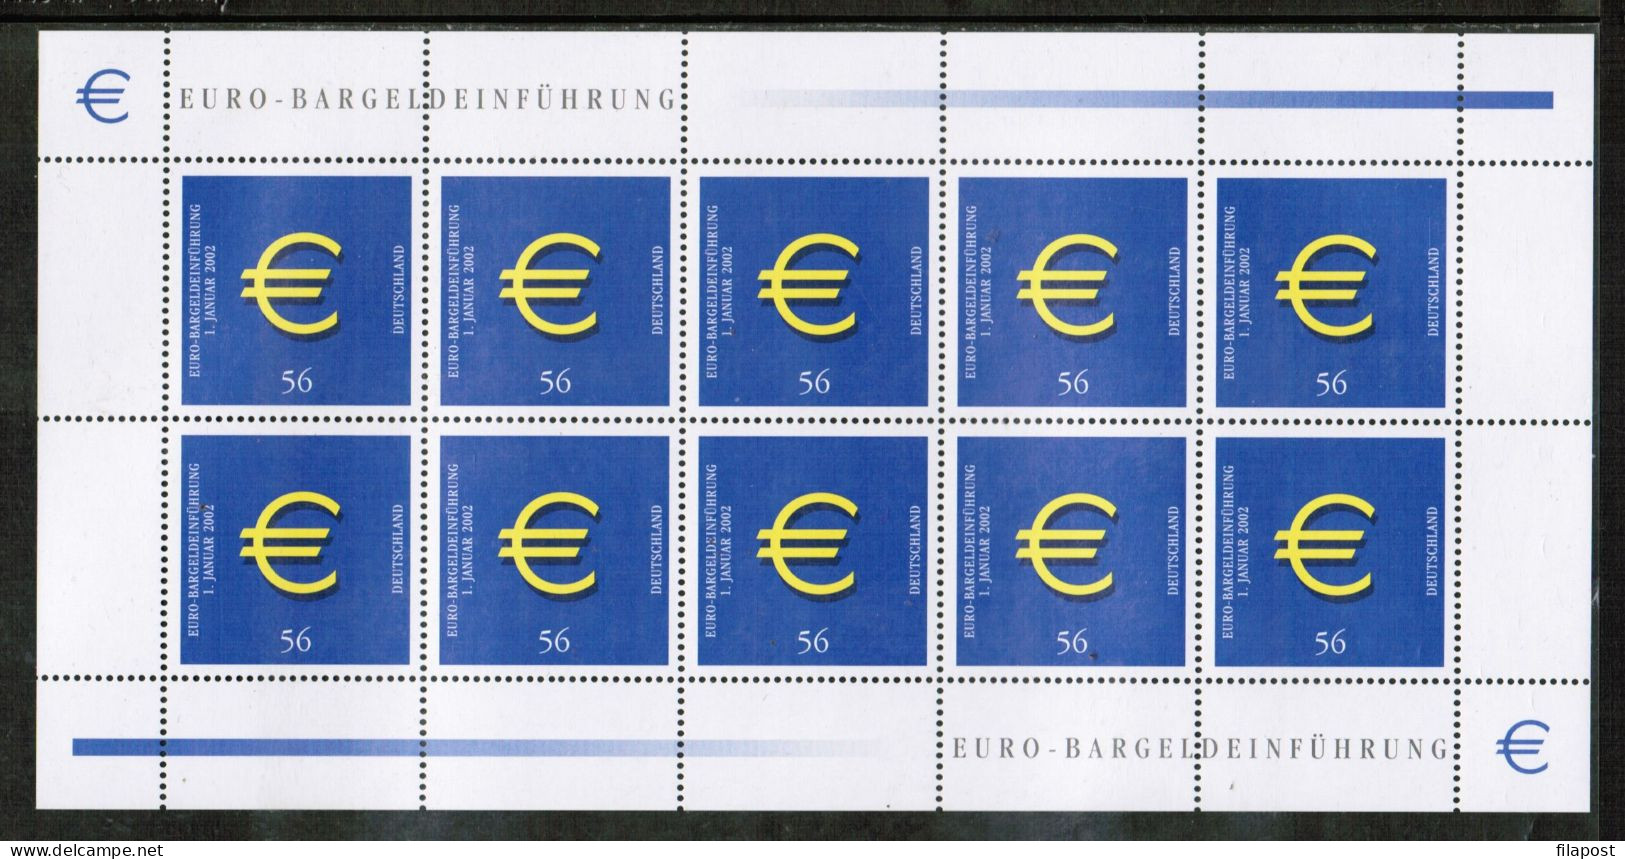 Germany 2002 / Michel 2234 Kb - 1 January 2002 Introduction Of Euro Cash - Sheet Of 10 Stamps MNH - Nuevos